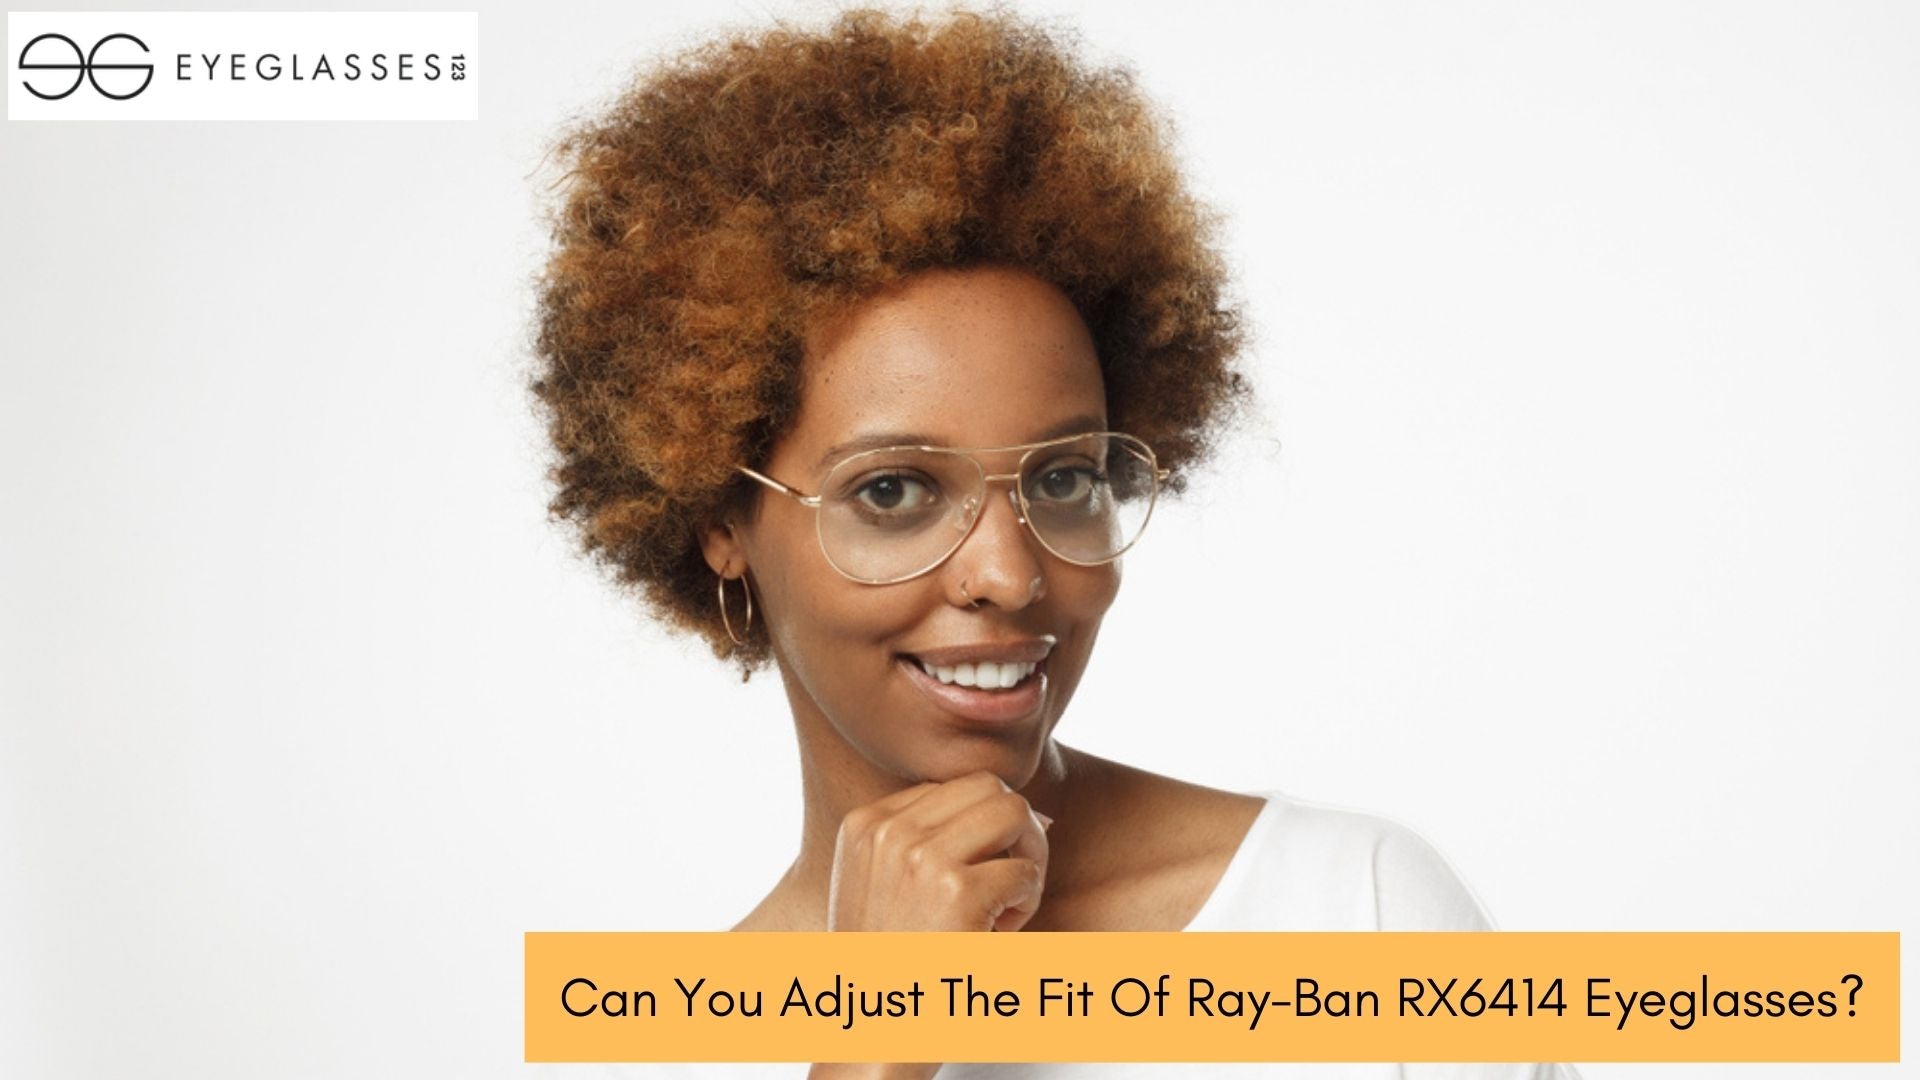 Can You Adjust The Fit Of Ray-Ban RX6414 Eyeglasses?